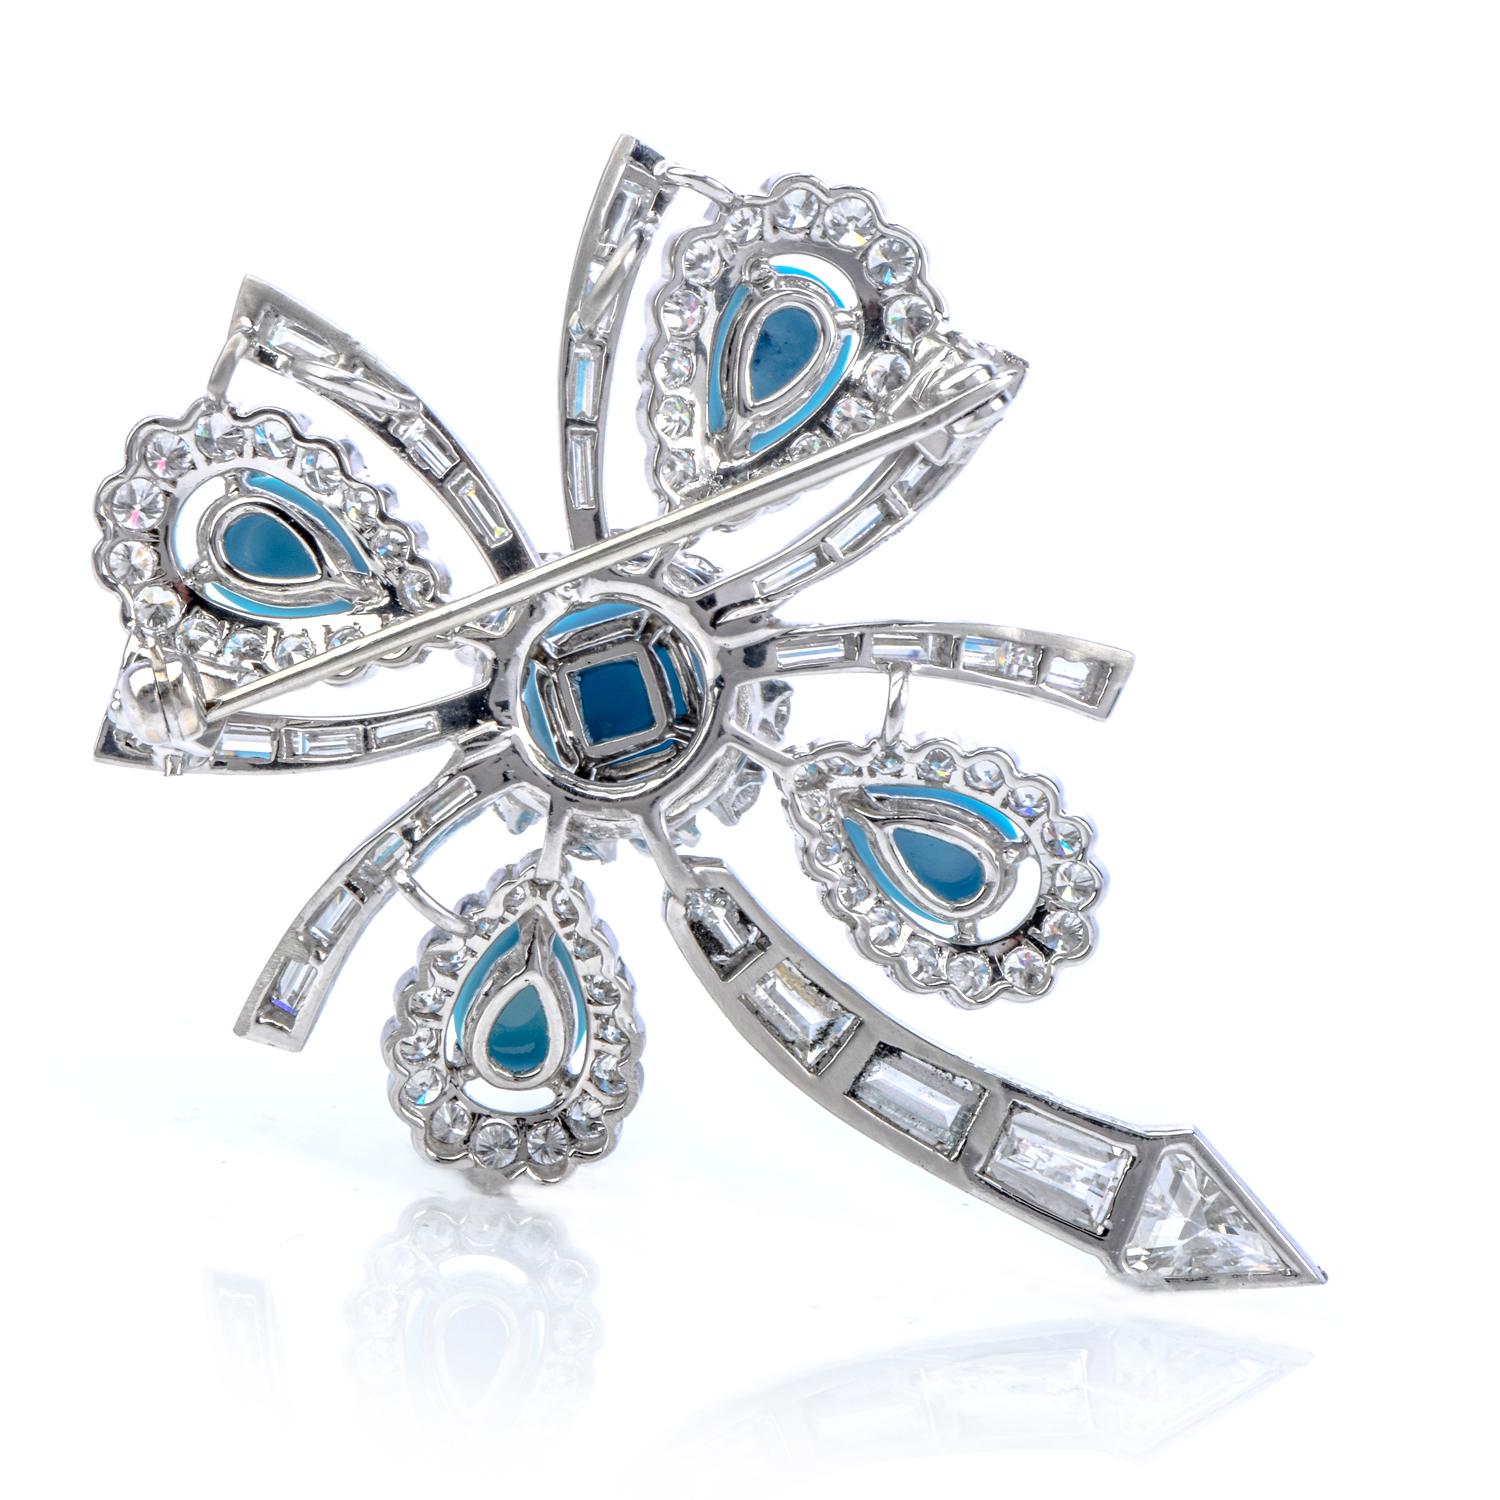 Wear a piece of pure charm with this delightful vintage Diamond Turquoise Platinum Cabochon Flower Brooch Pin! 

This piece is crafted in luxurious platinum and is inspired by a unique flower design.  There are four genuine  Persian turquoise of